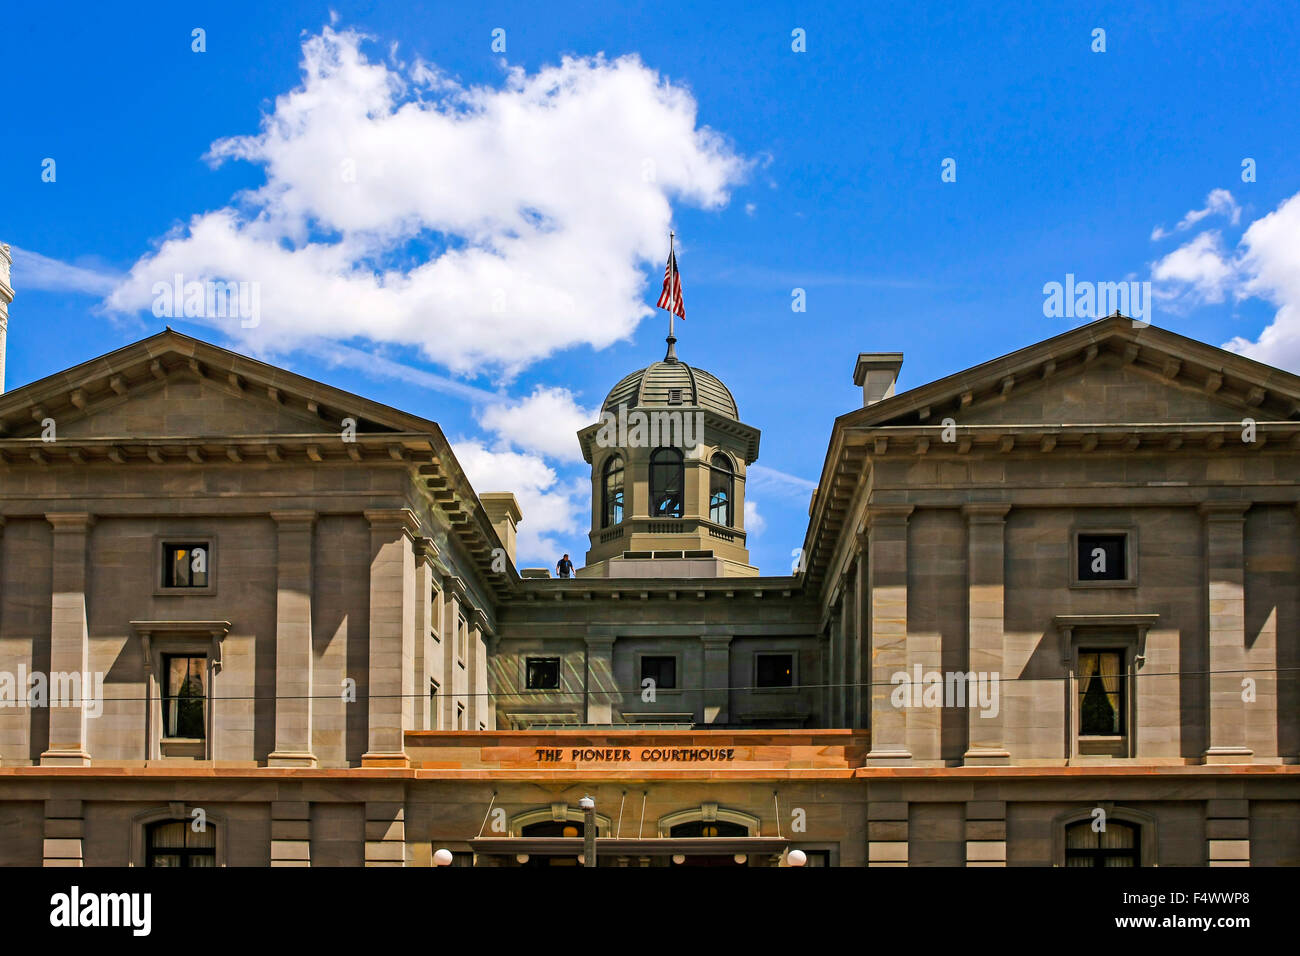 The 1869 Pioneer Courthouse building on 6th Ave in Portland Oregon, the second oldest courthouse west of the Mississippi. Stock Photo